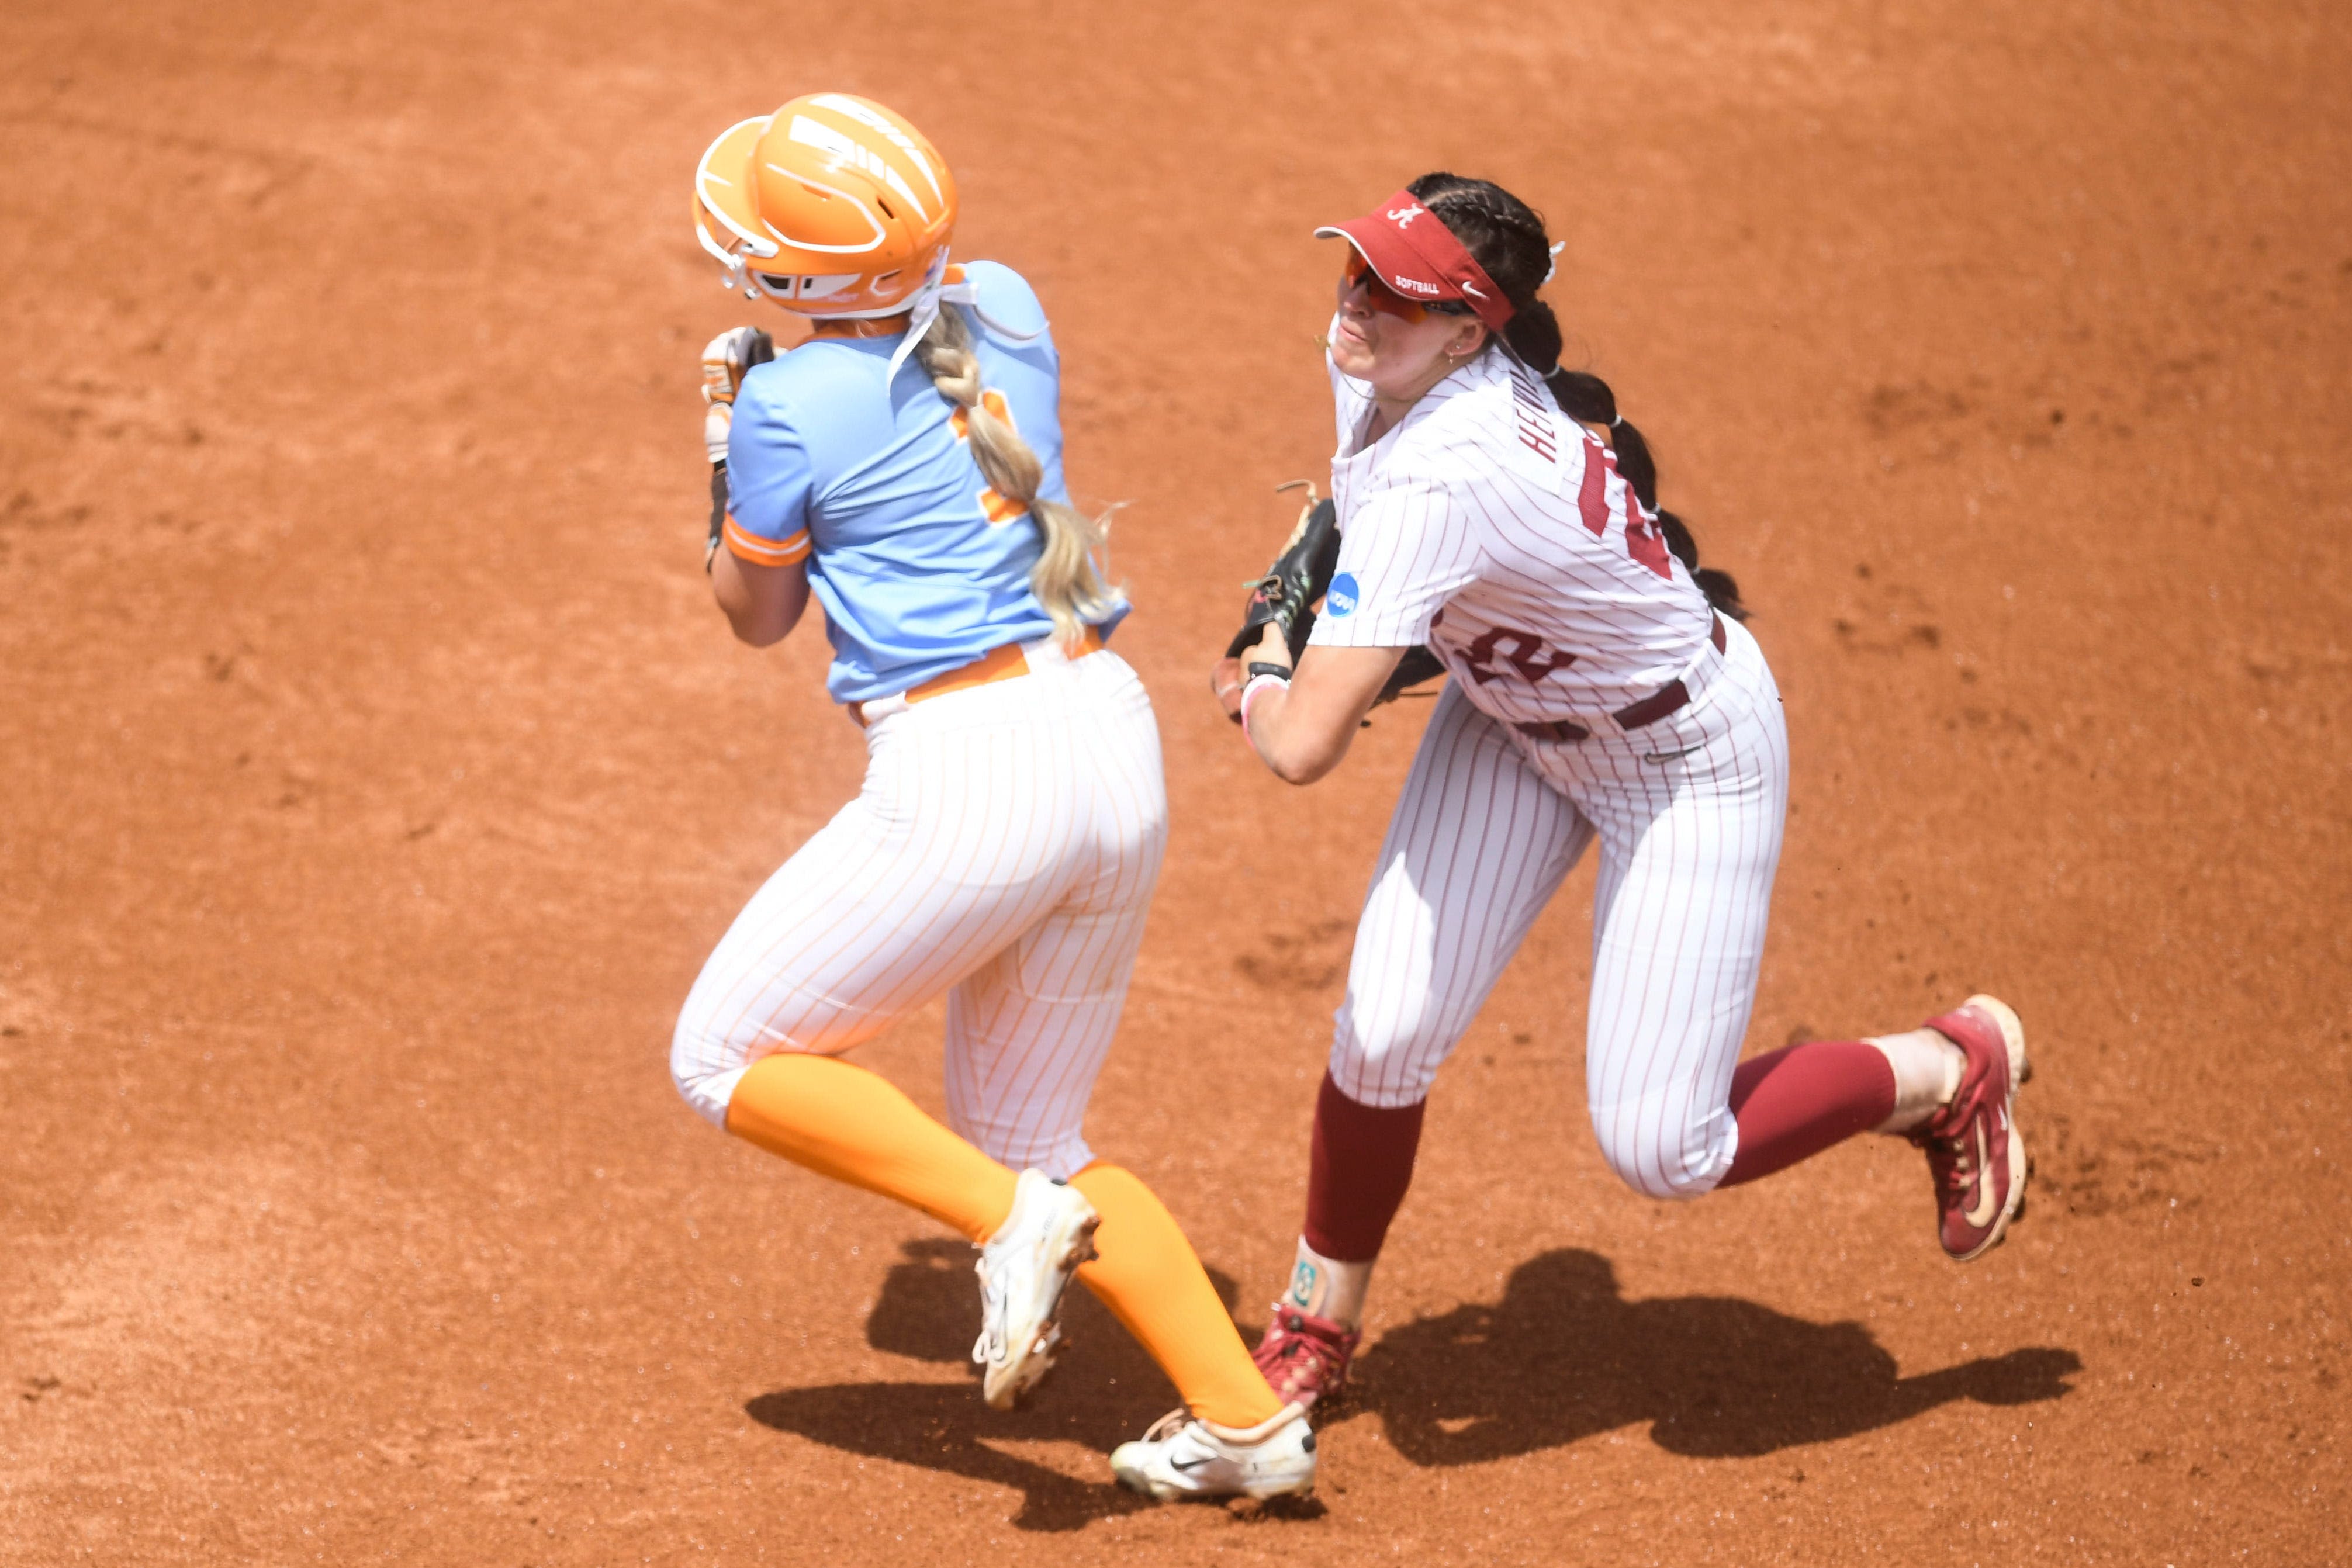 Tennessee softball loses to Alabama in longest game in NCAA super regional history to force third game